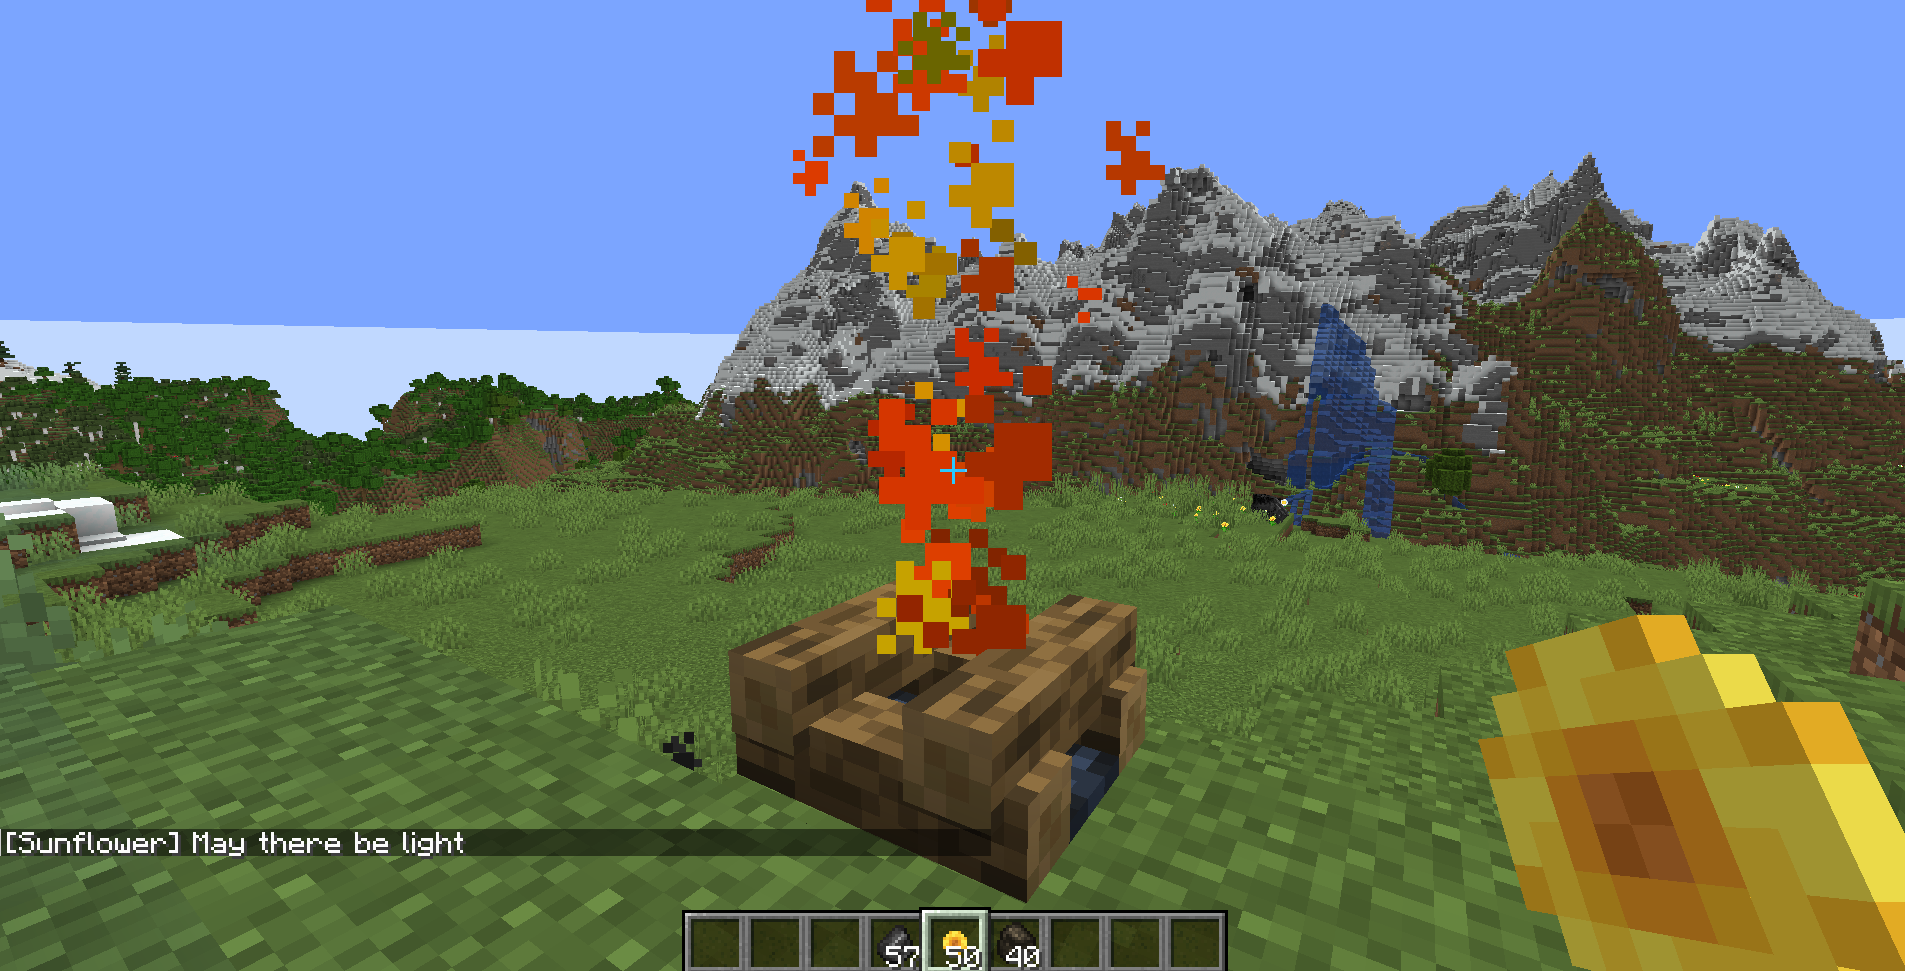 Result of throwing a sunflower on a lit campfire